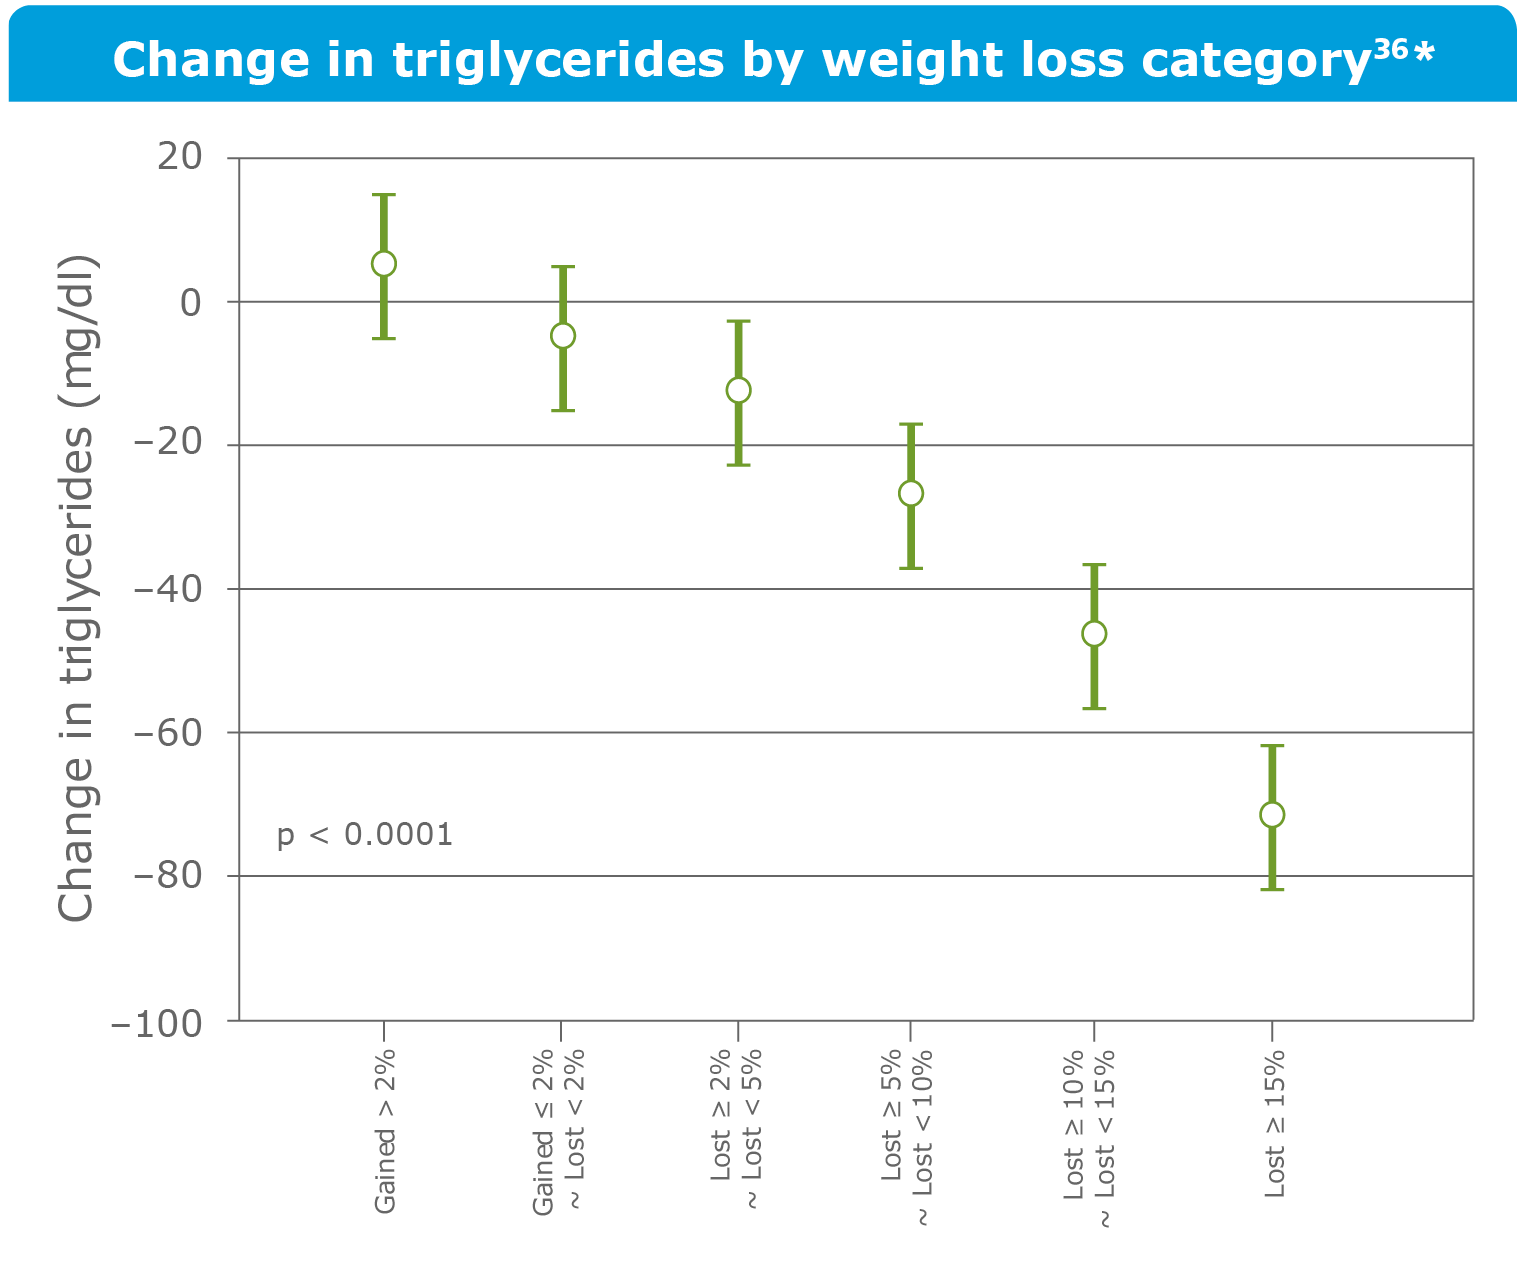 Change in weight loss by weight loss category